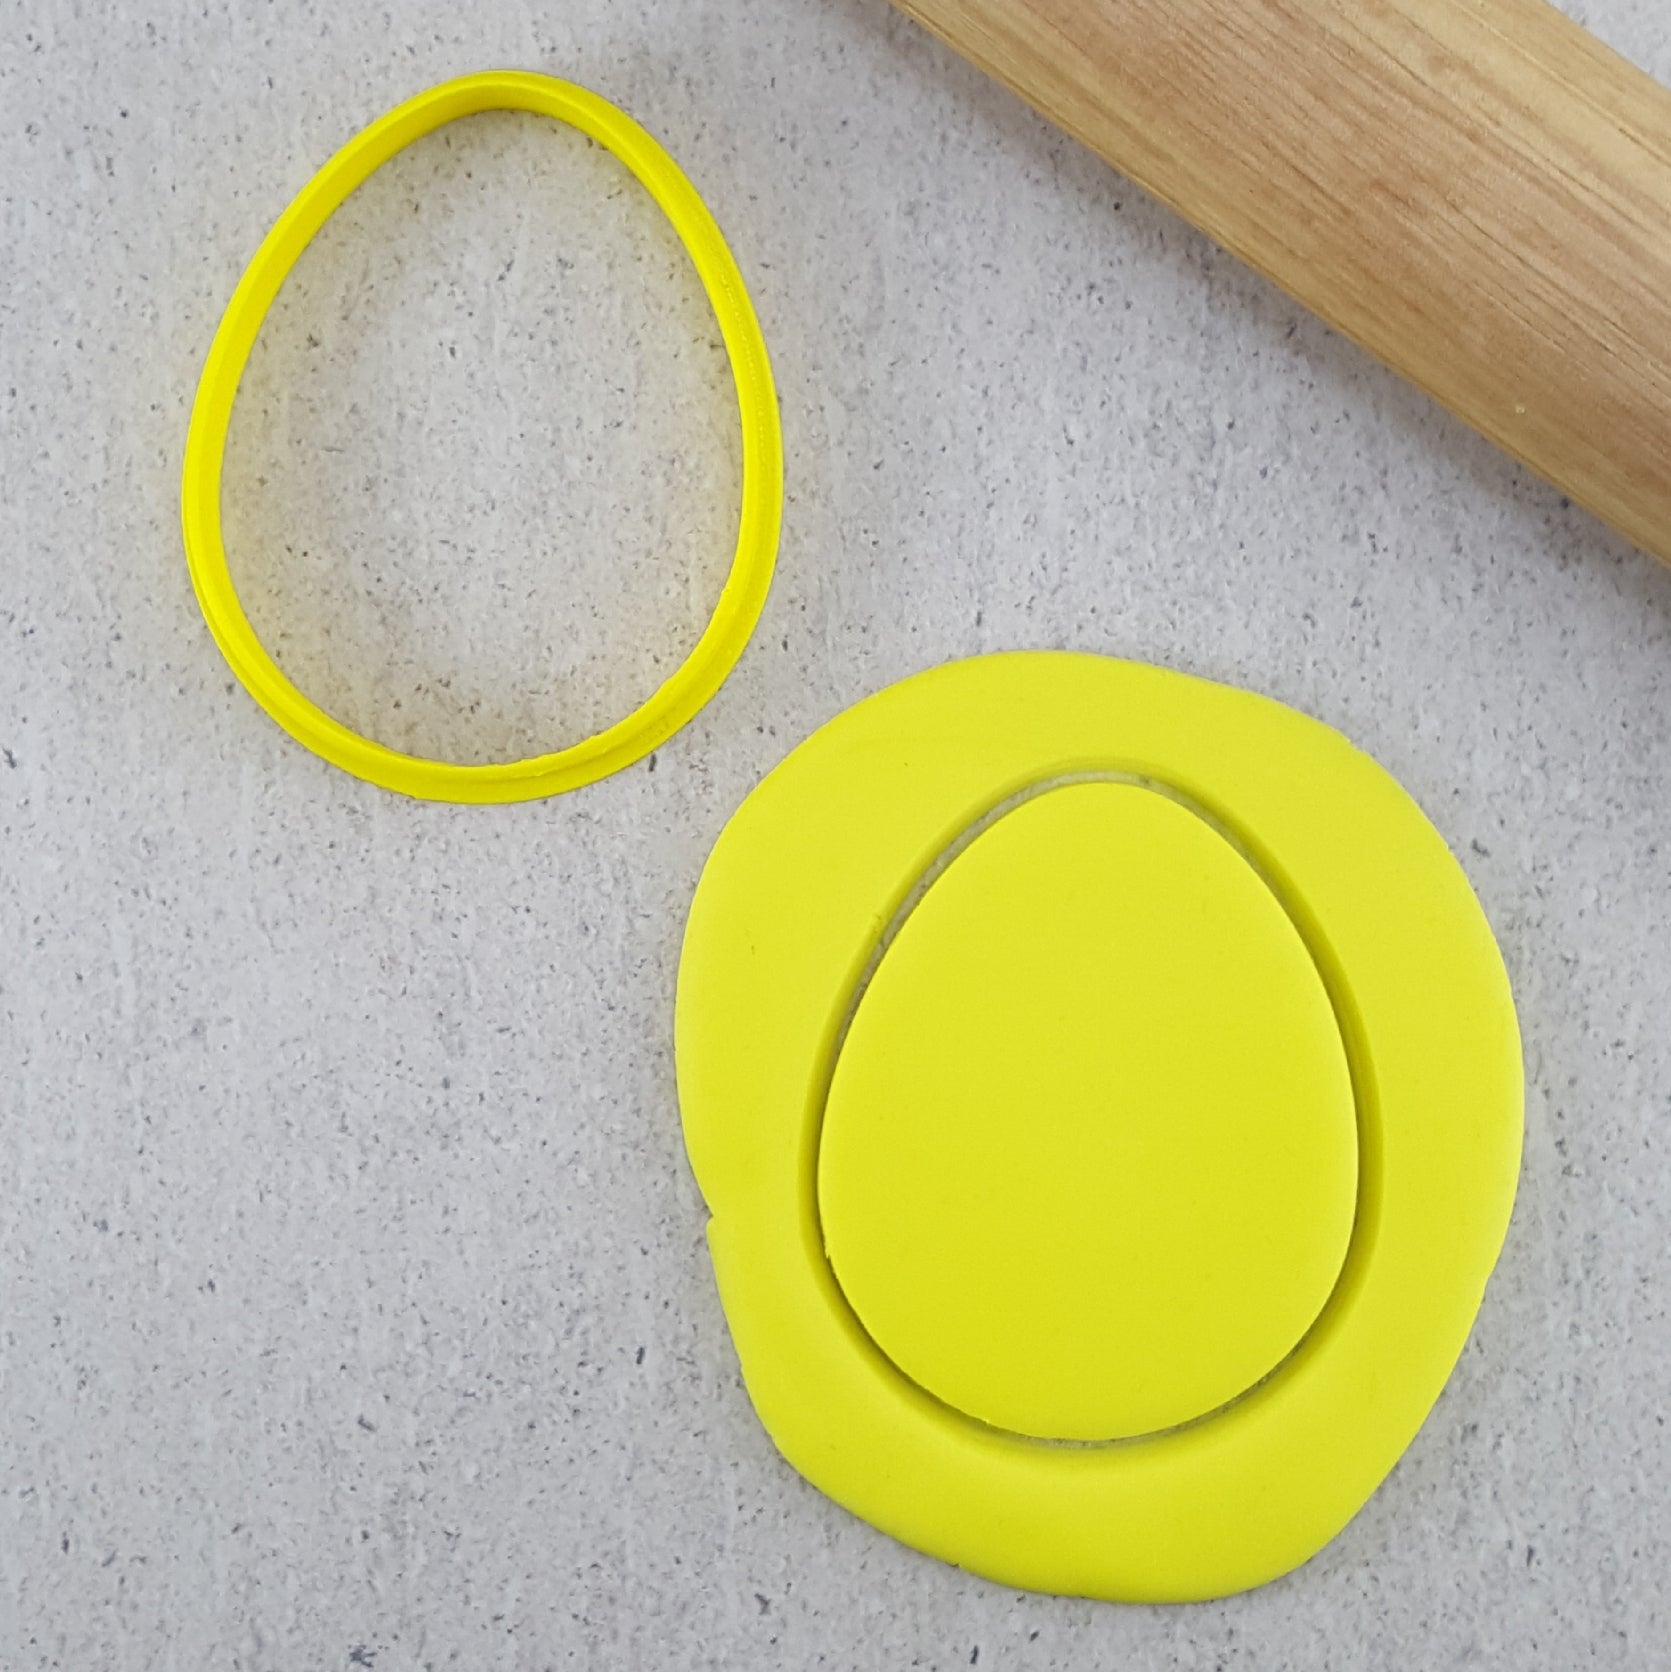 EGG 2.5INCH - 63mm PLASTIC COOKIE CUTTER